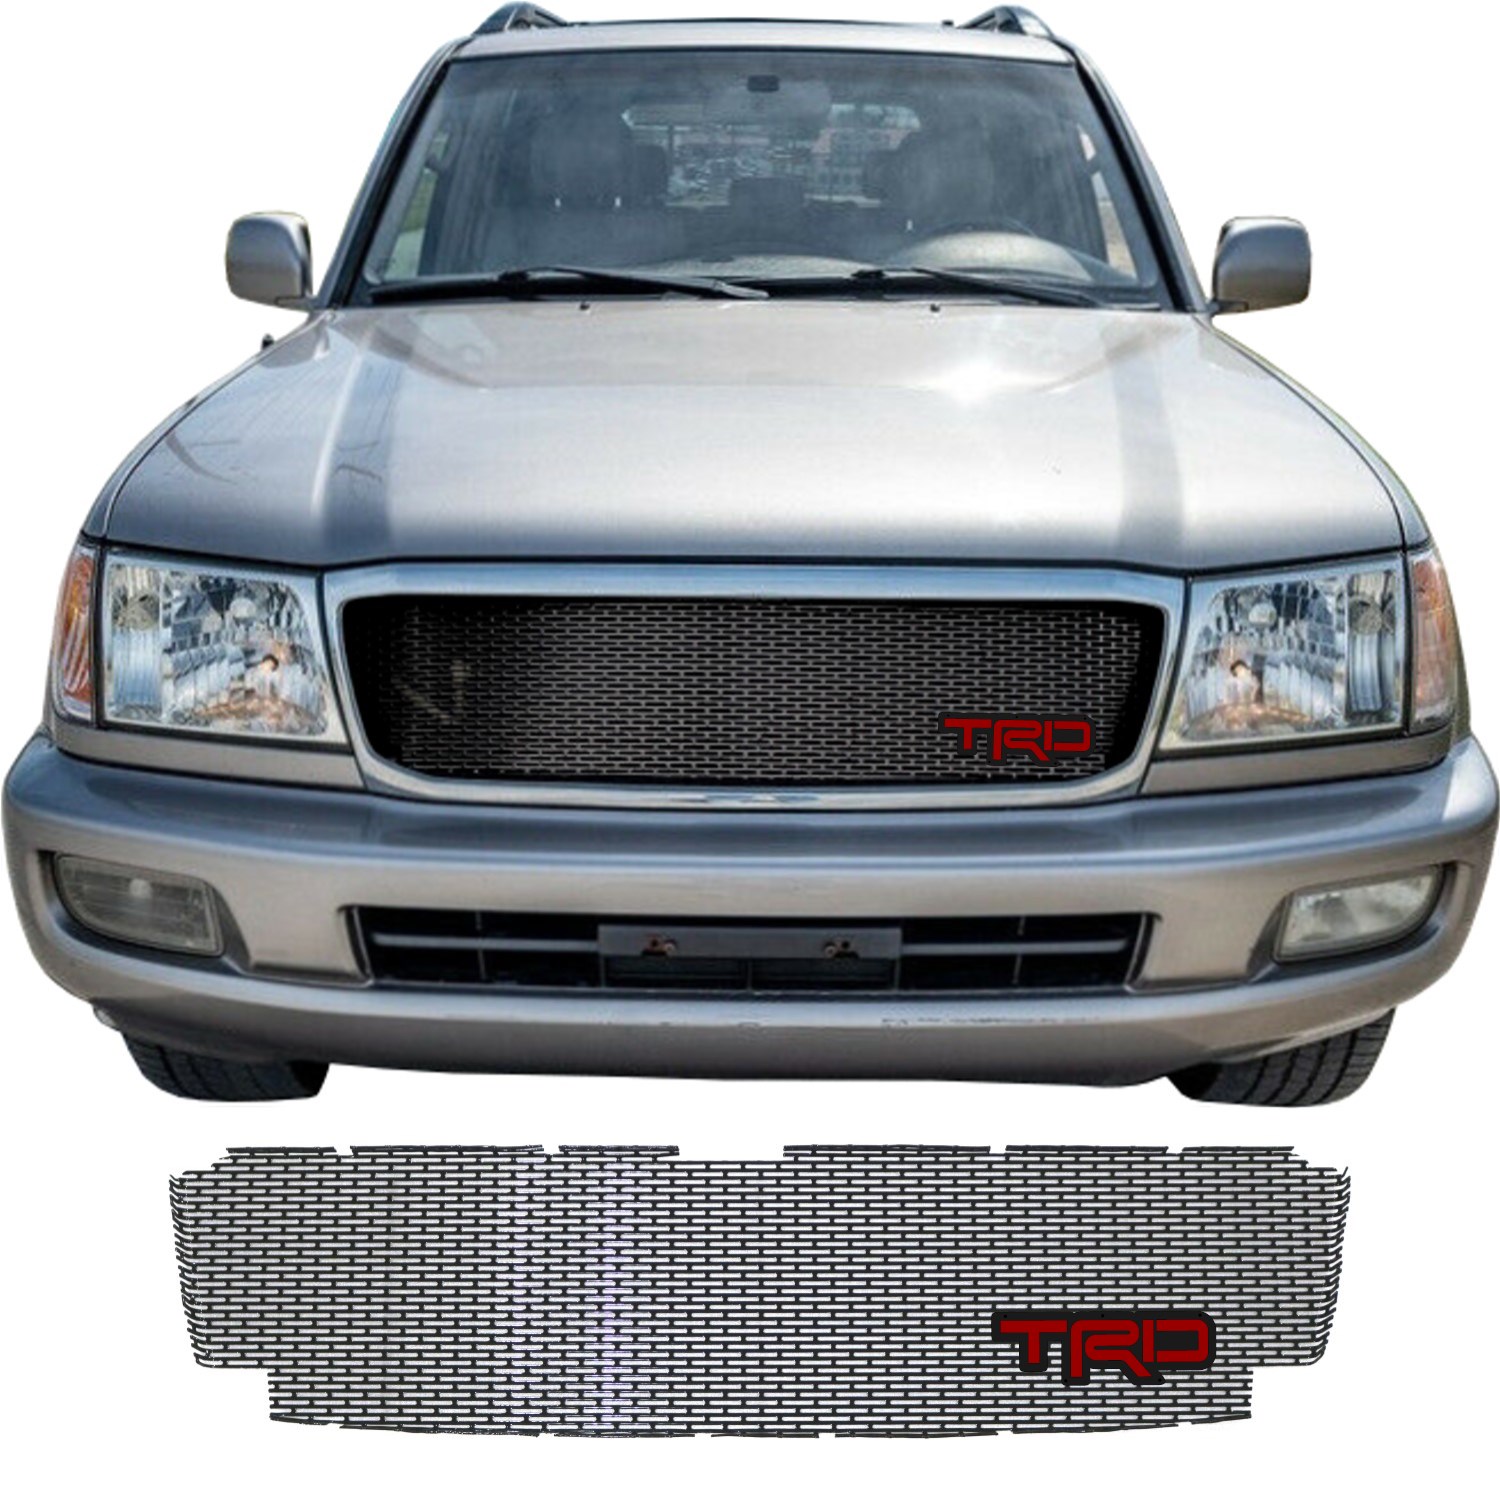 2003 - 2005 Toyota Land Cruiser Series 100 Grill Mesh and TRD Emblem